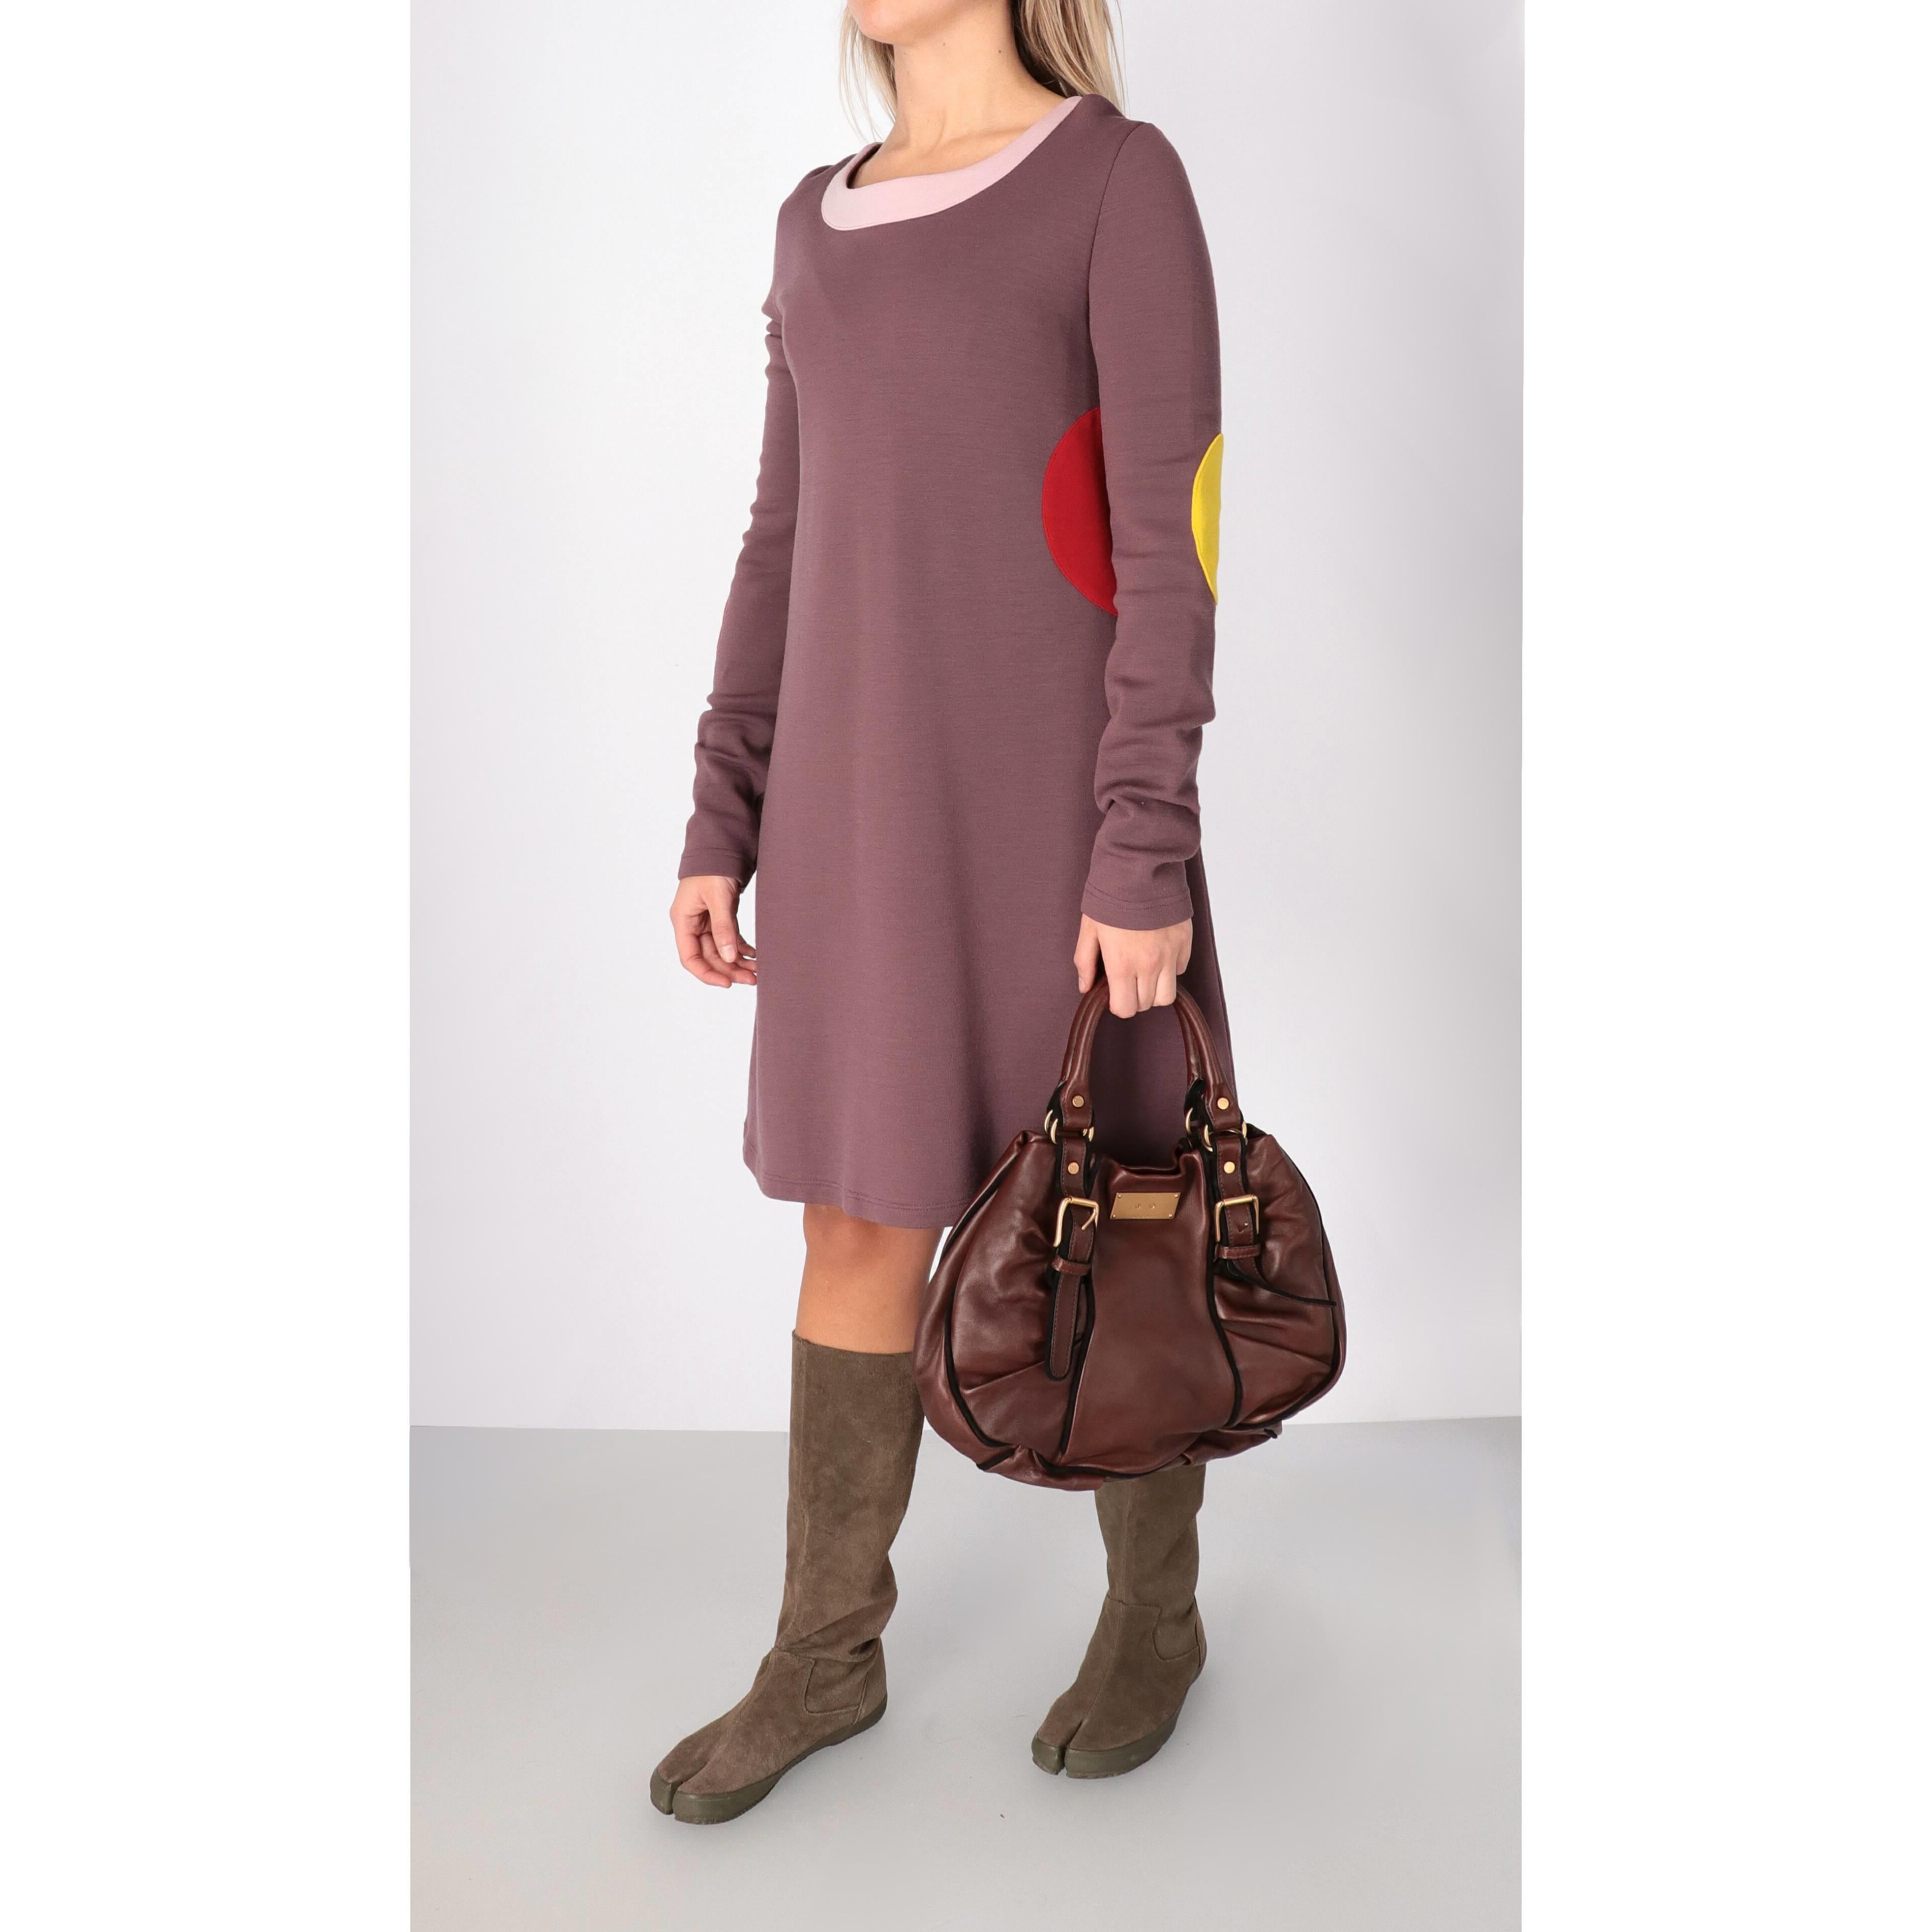 Marni mauve wool blend dress with yellow and red patches appliqué. Straight cut with round neckline and long sleeves.

Size: 46 IT

Flat measurements
Height: 92 cm
Bust: 47 cm
Shoulders: 42 cm
Sleeves: 68 cm

Product code: X0057

Notes: The product